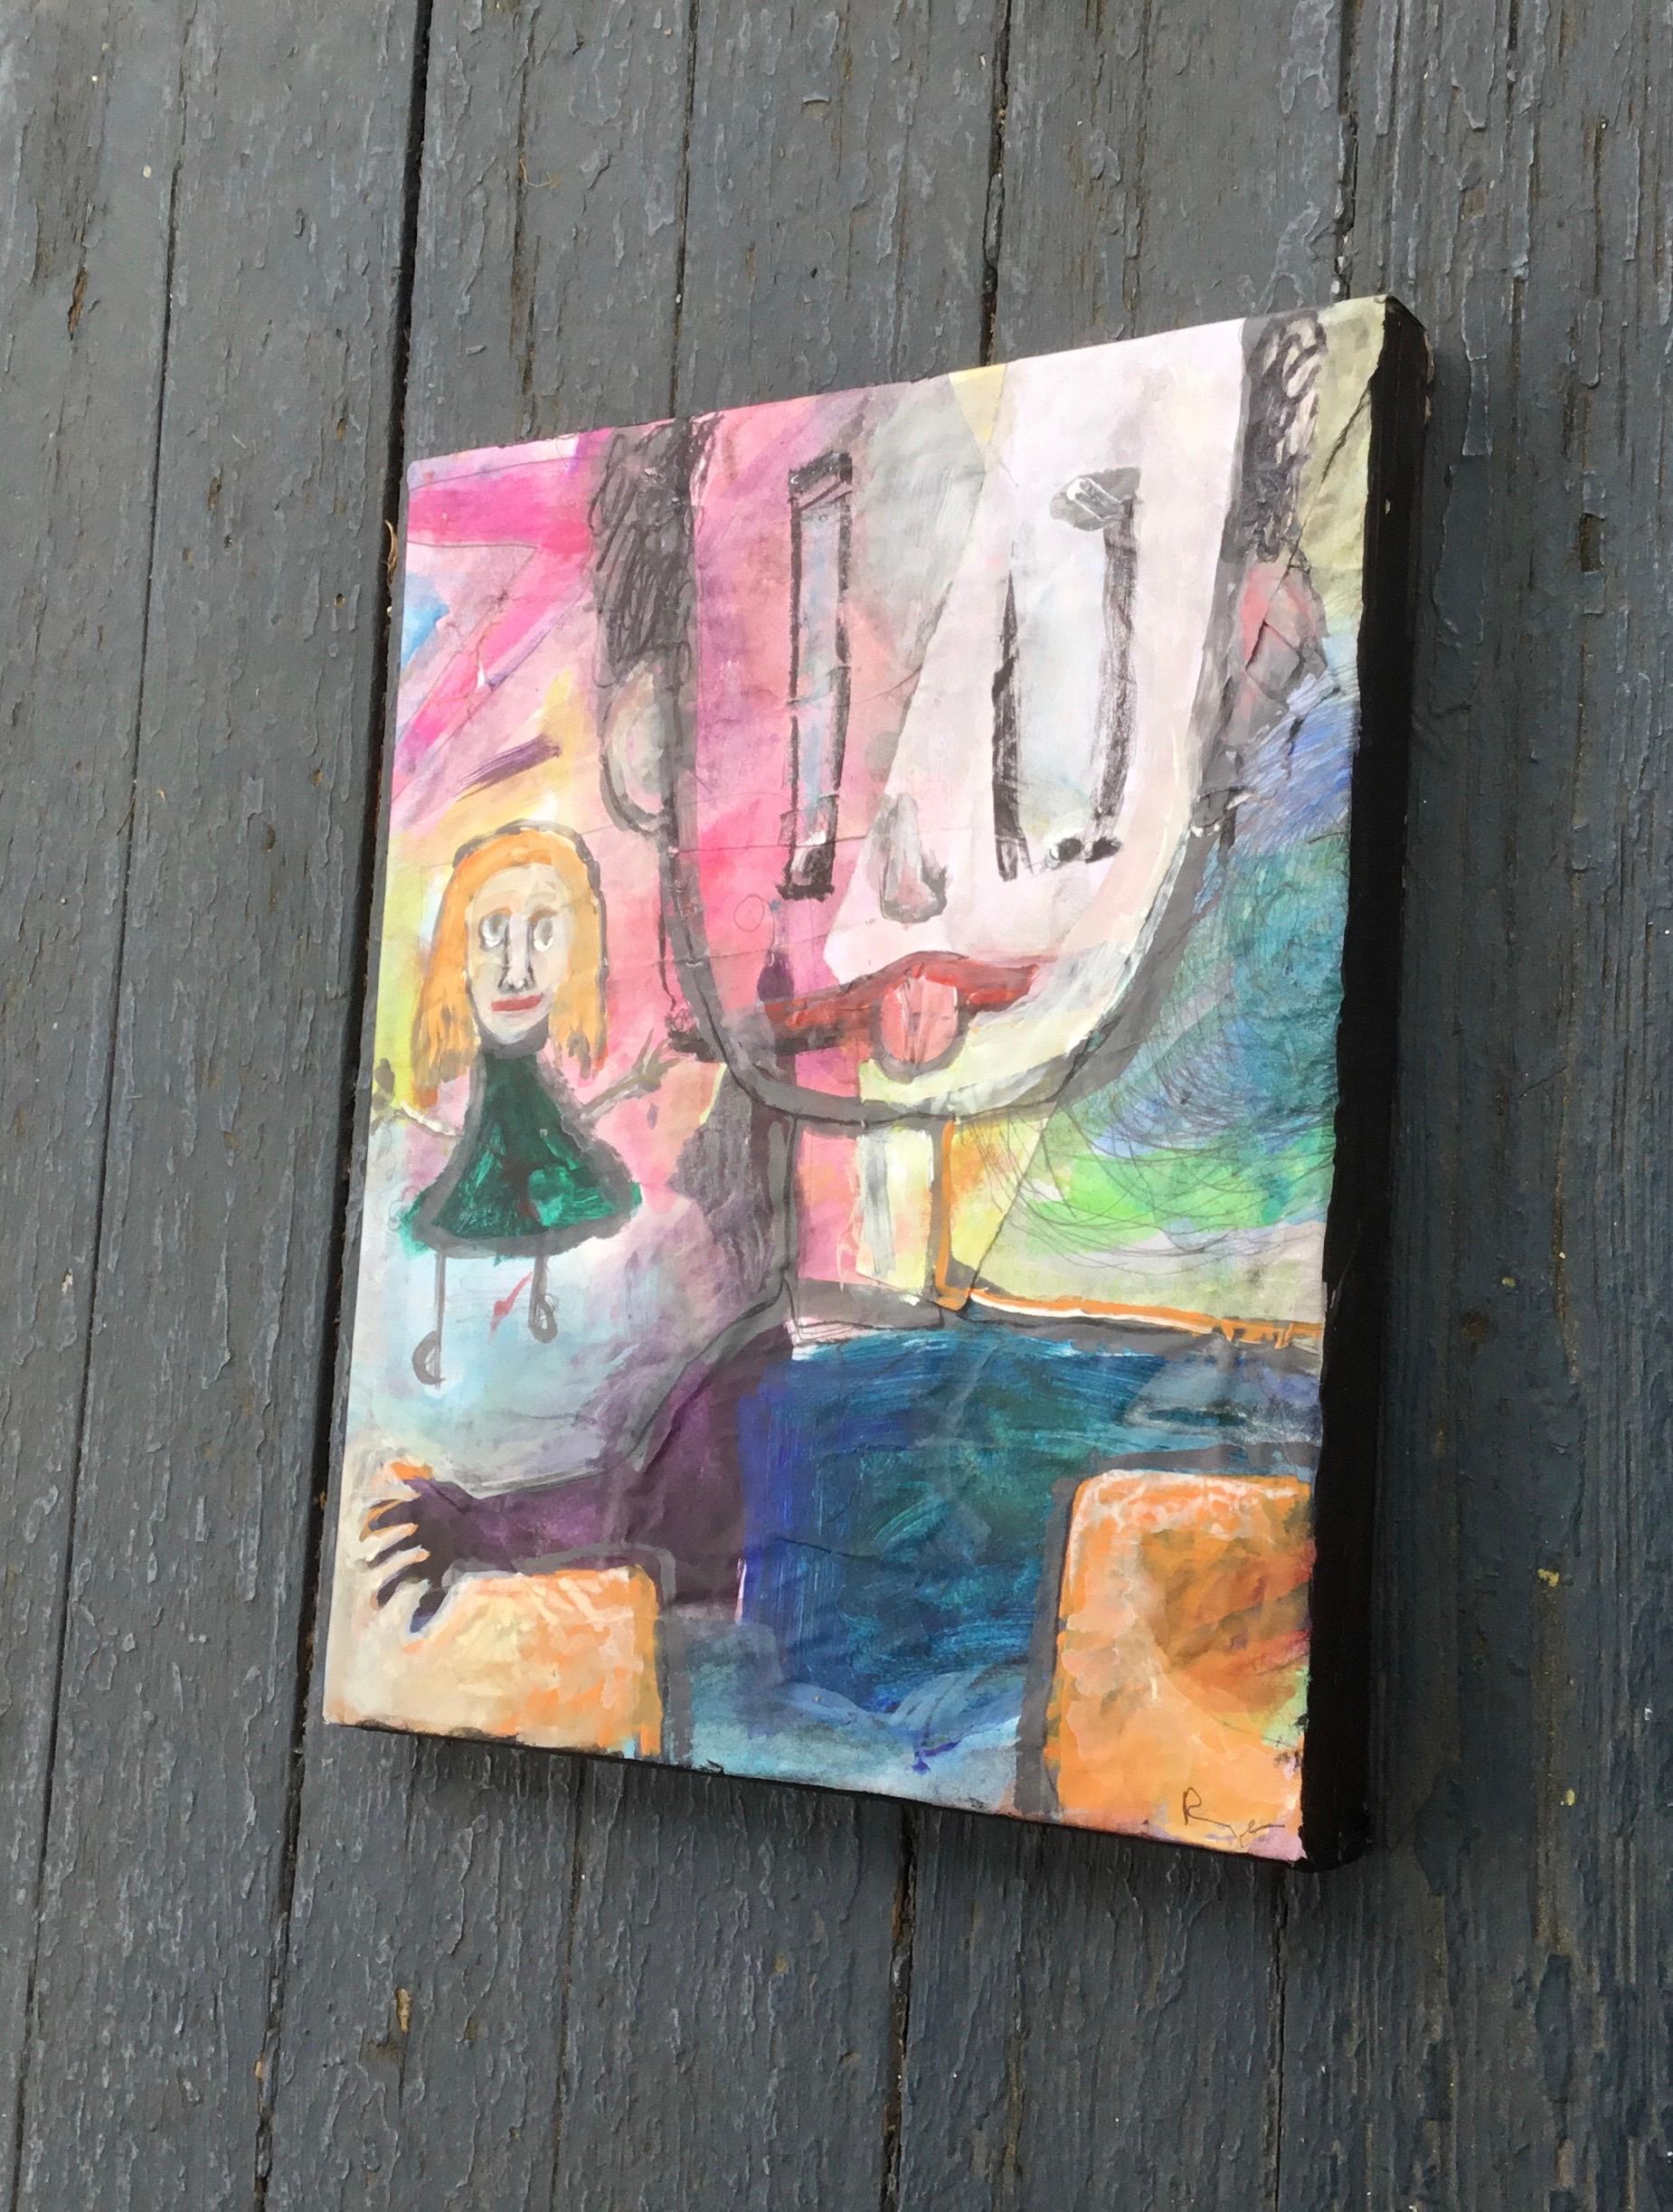 <p>Artist Comments<br>Derived from a section of repurposed childrenâ€™s art, the piece embodies memories of playful antics on the playground. It boasts a naive style of imagery, lending authenticity to its concept. Artist Libby Ramage uses pencil,